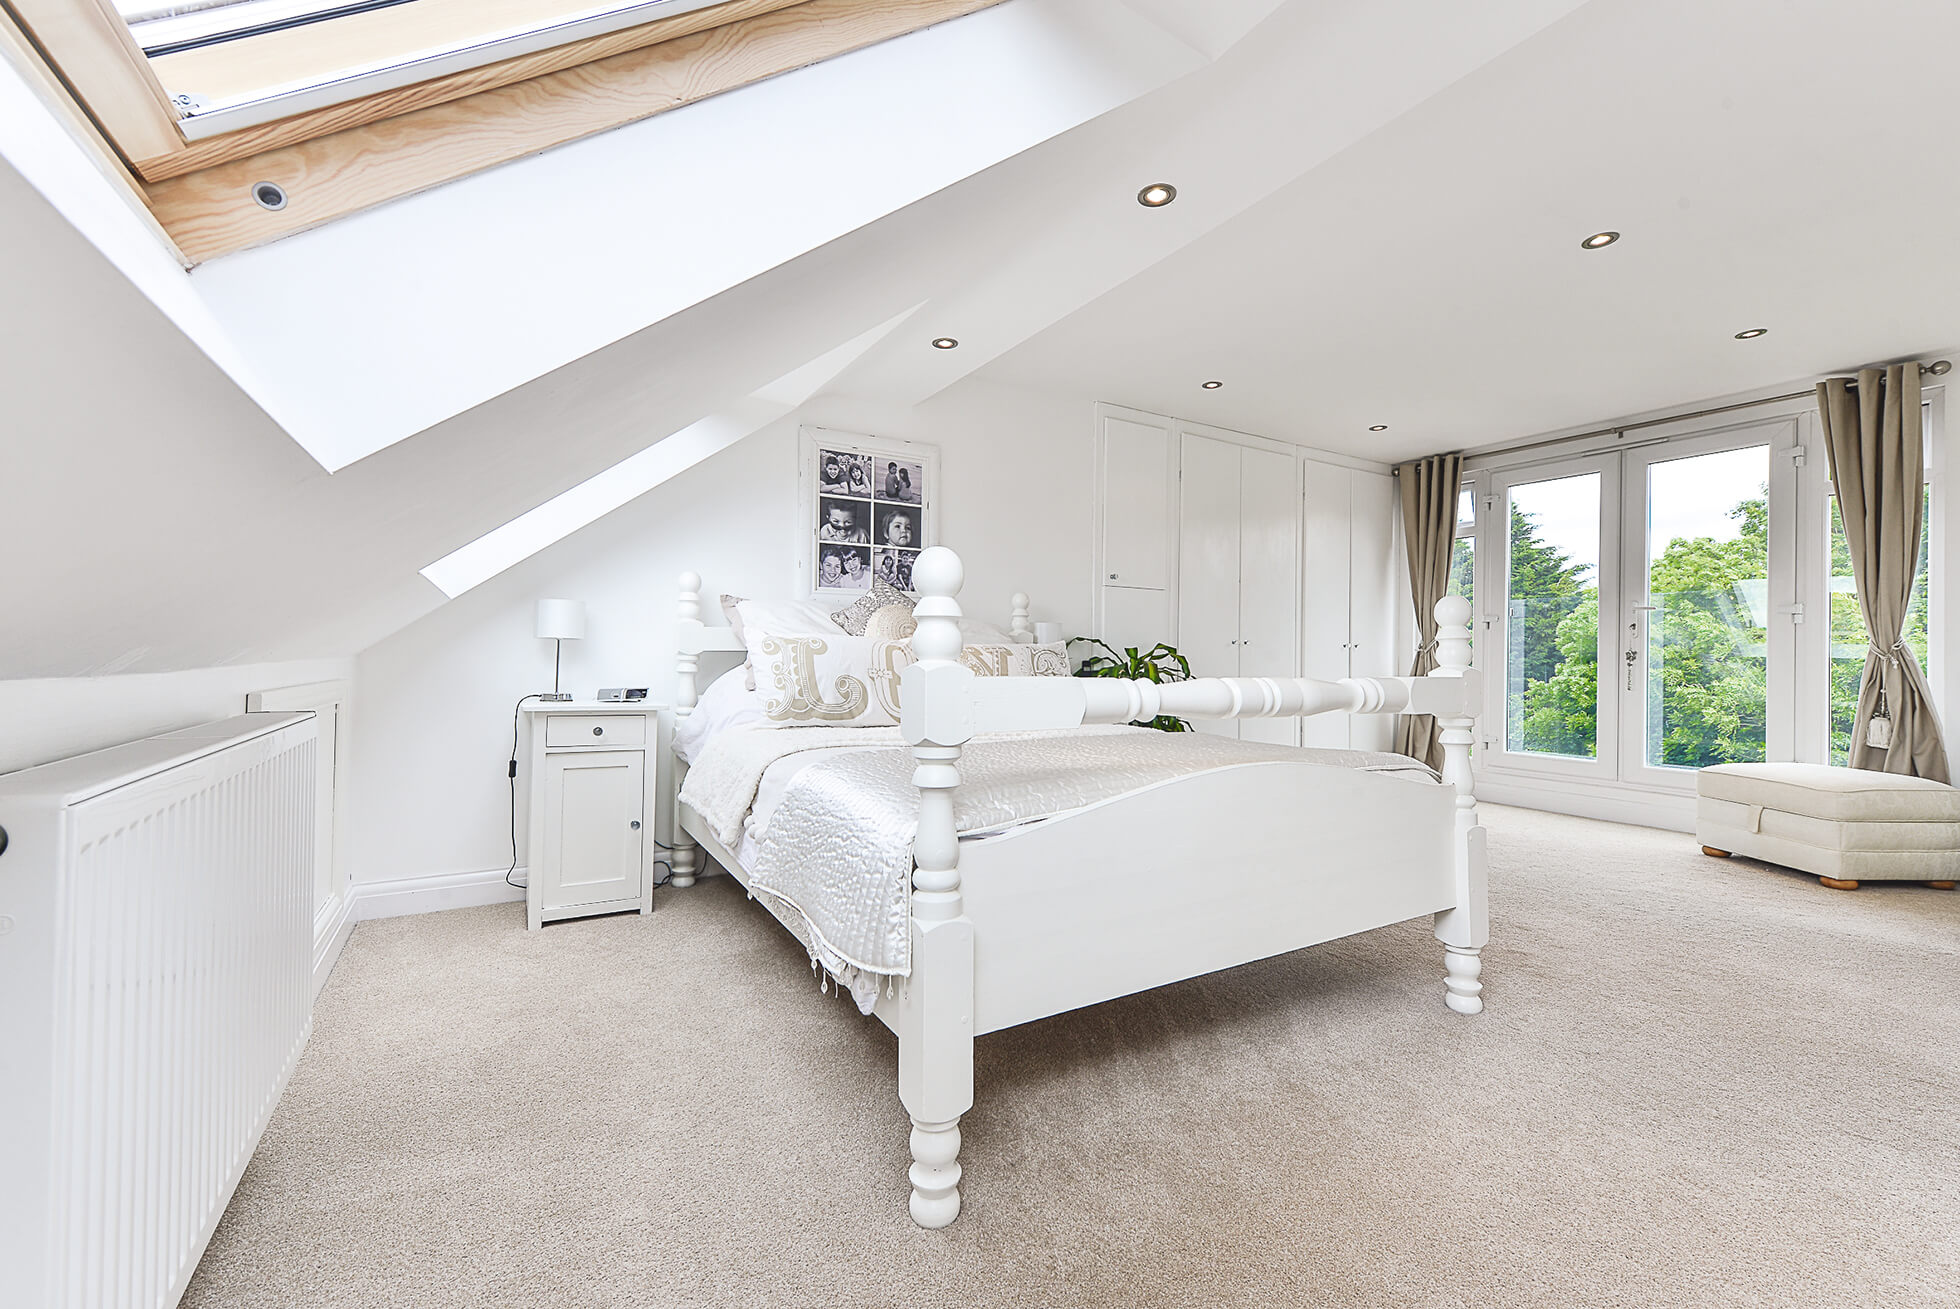 Do you have a question about converting your Loft in Bishops Stortford? Here are the most popular questions asked by our clients.